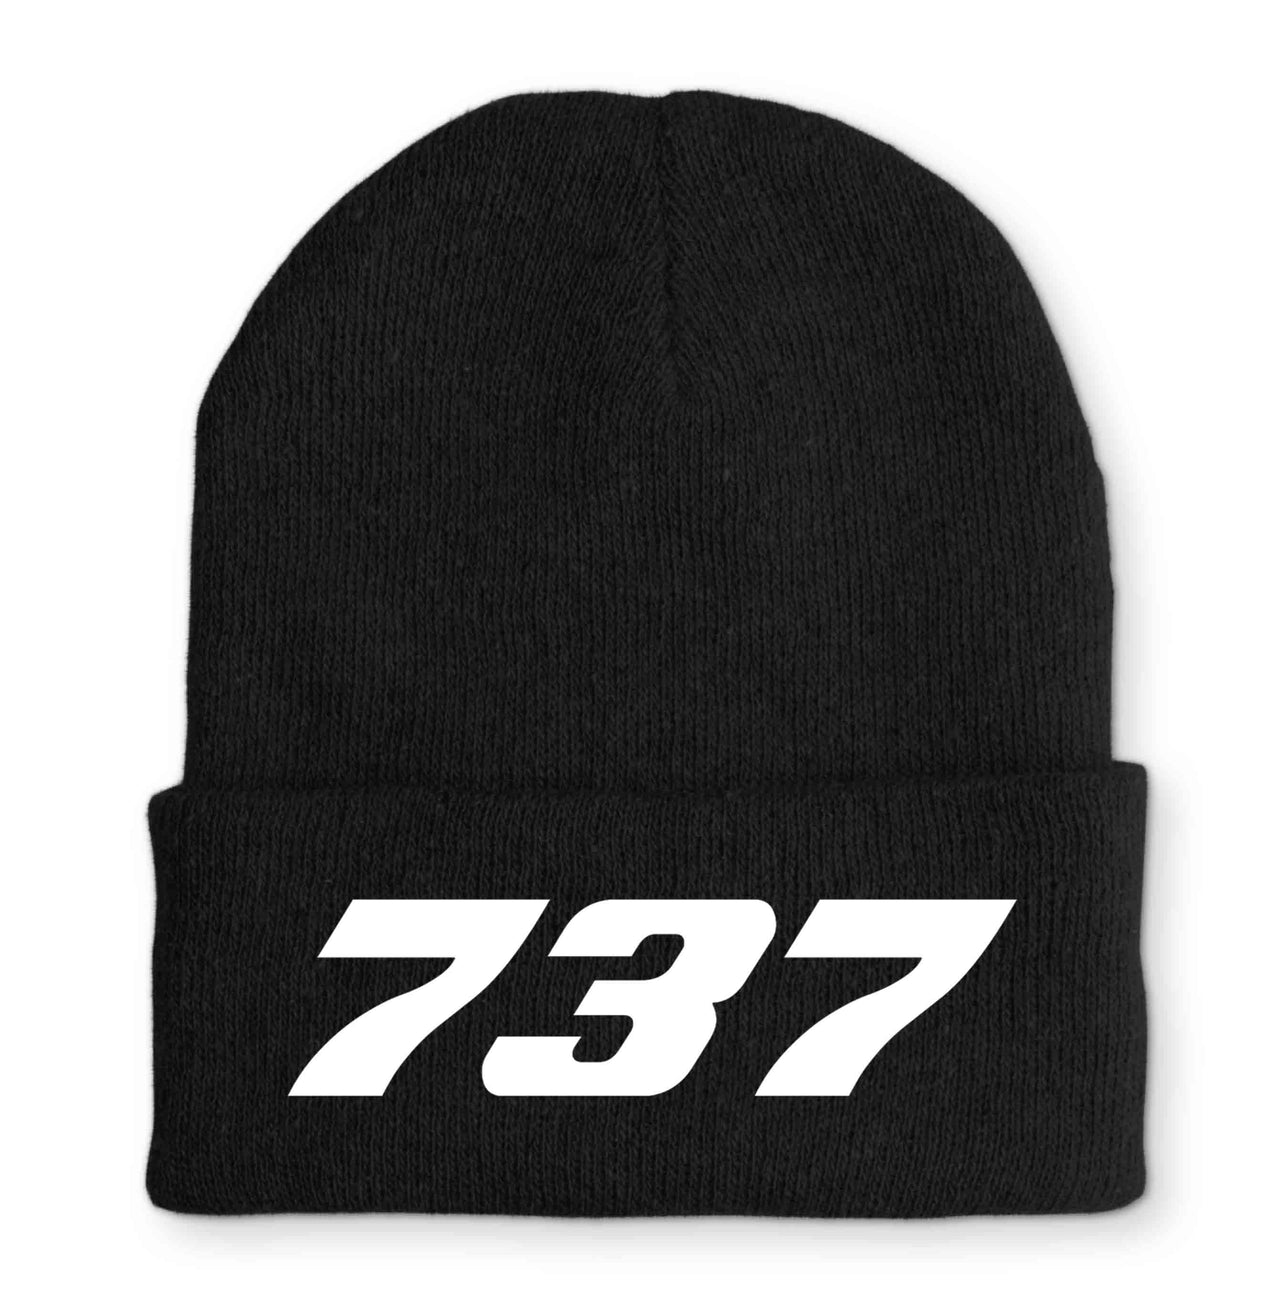 737 Flat Text Embroidered Beanies